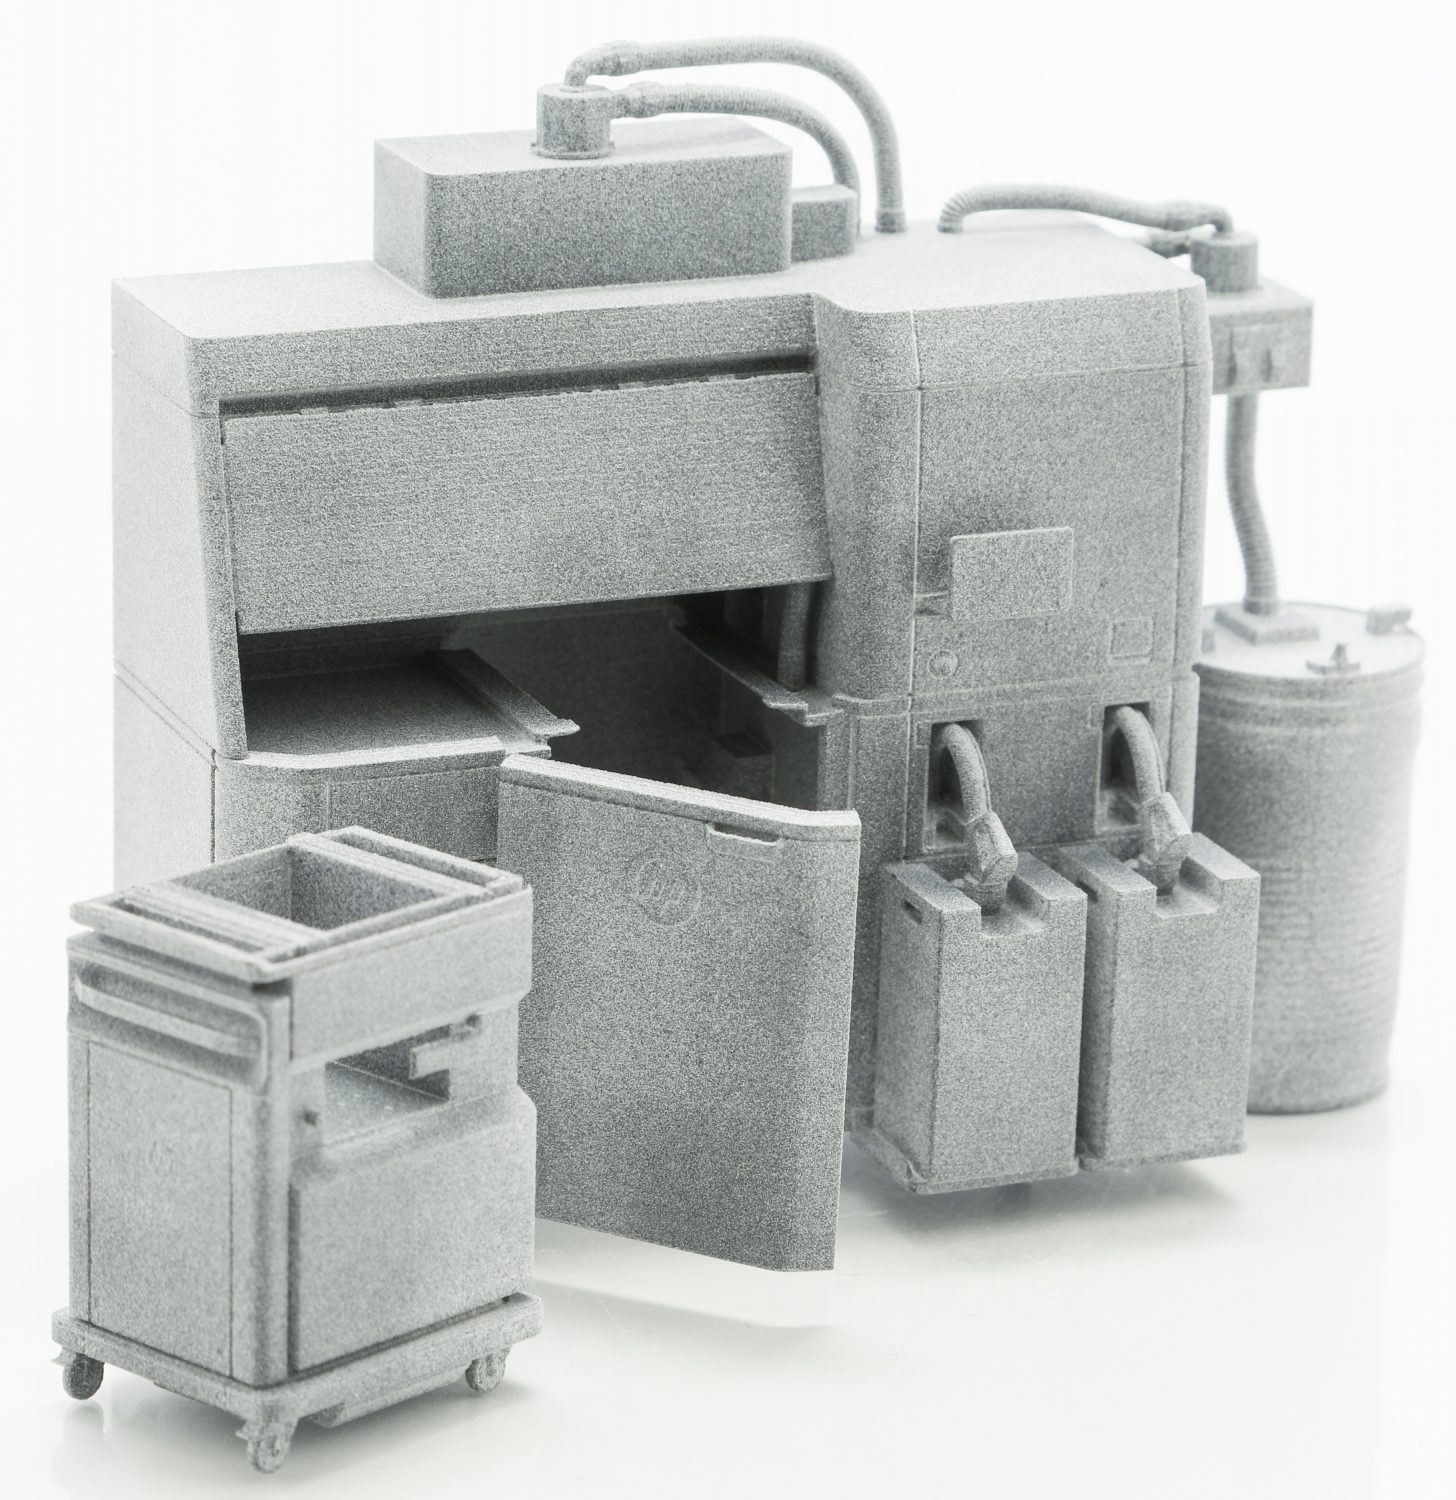 A 3D-printed model of an HP 3D printing system including tanks, connectors and cart.